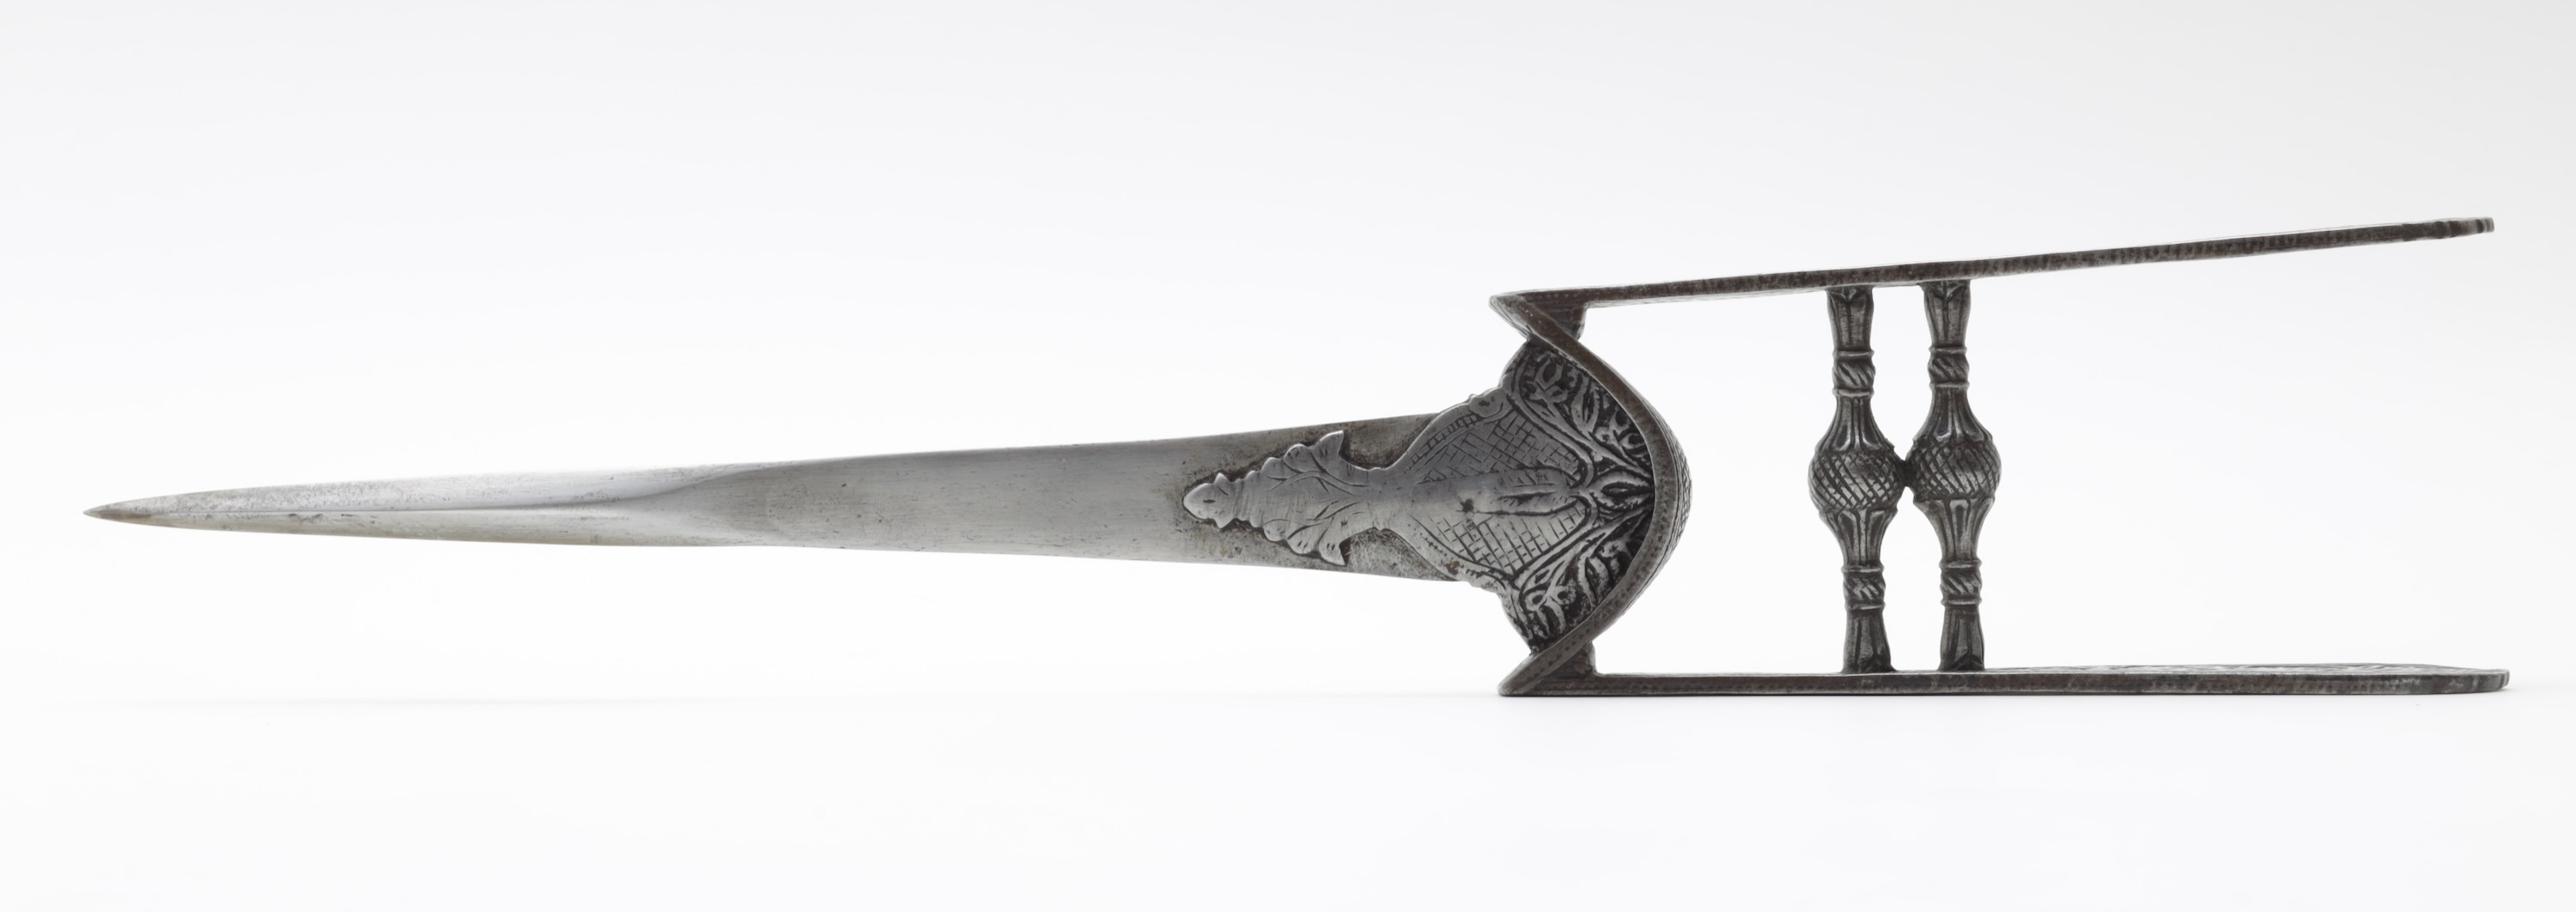 Southern katar with piercing blade